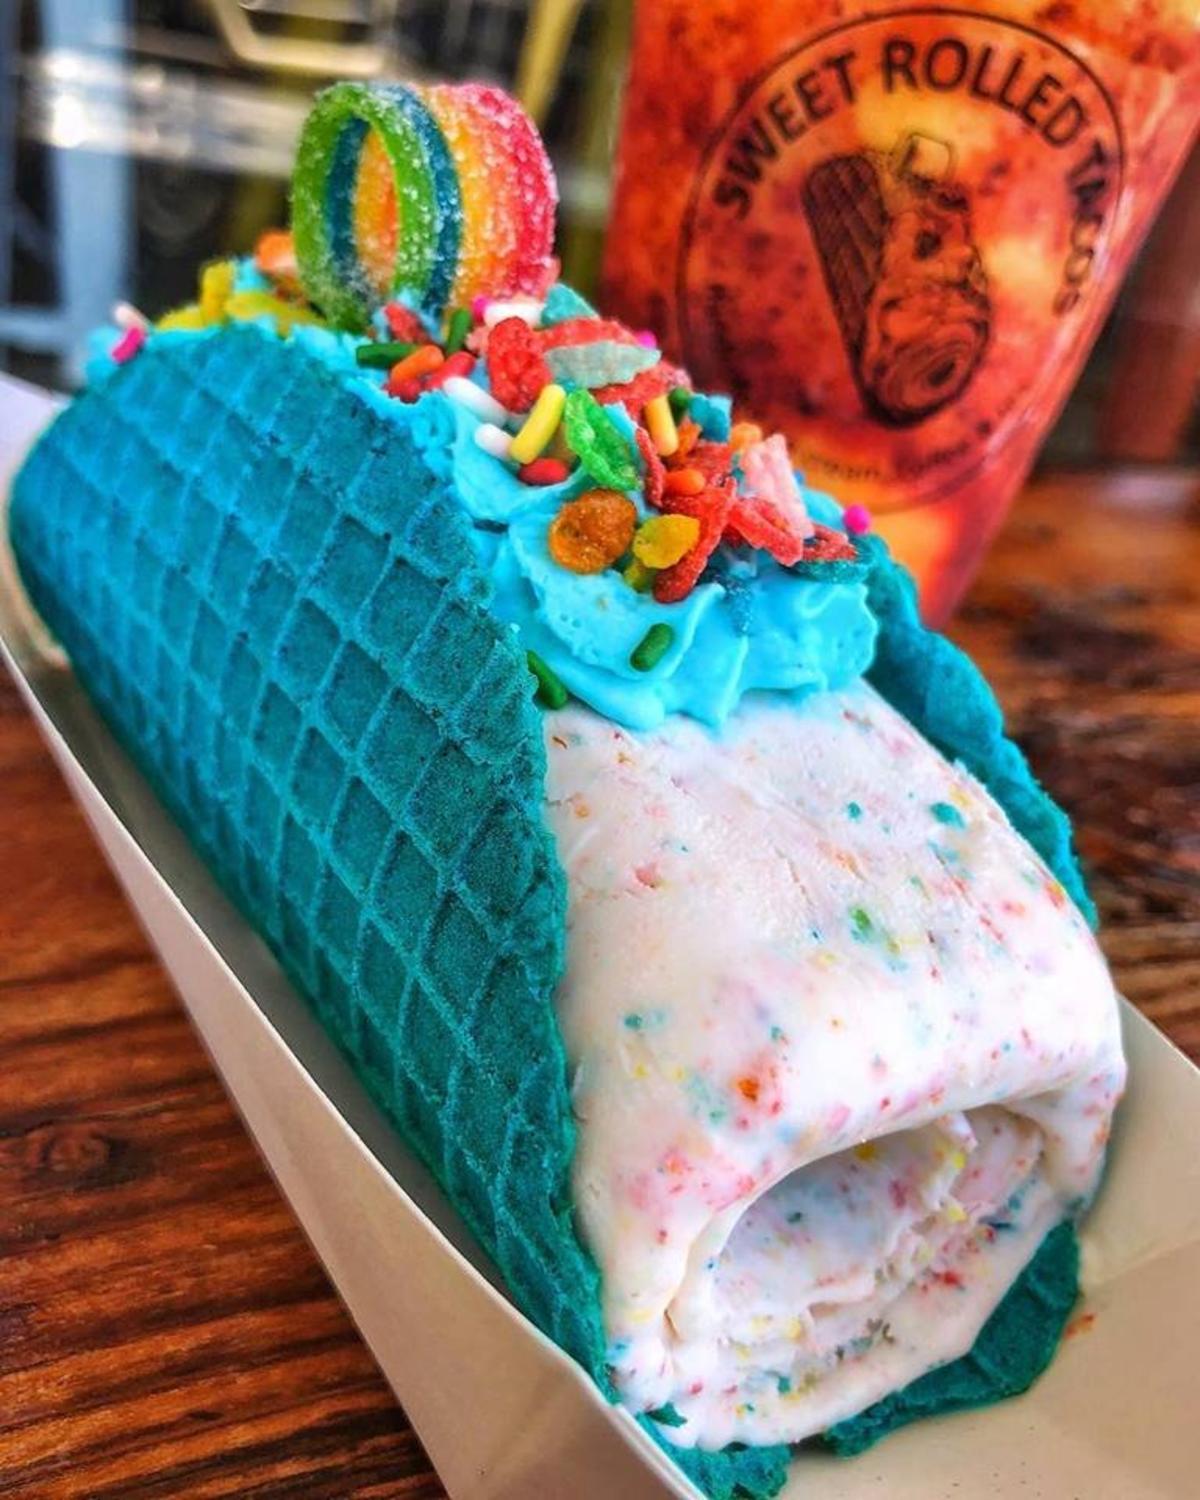 Ice cream taco with waffle cone shell at Sweet Rolled Tacos in Huntington Beach